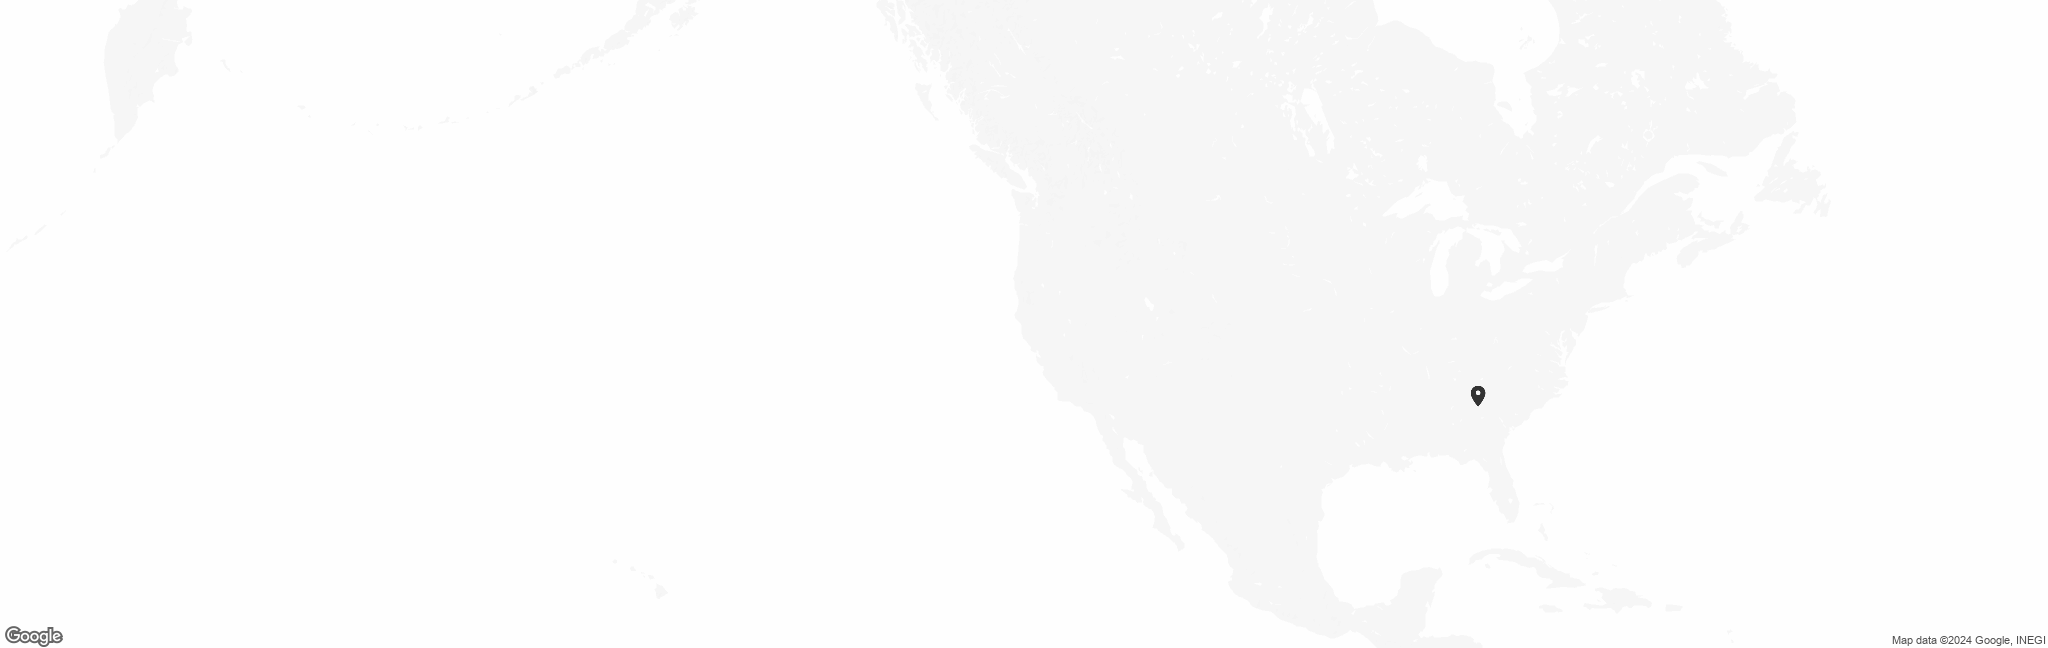 Map of US with pin of Project CF Spouse location